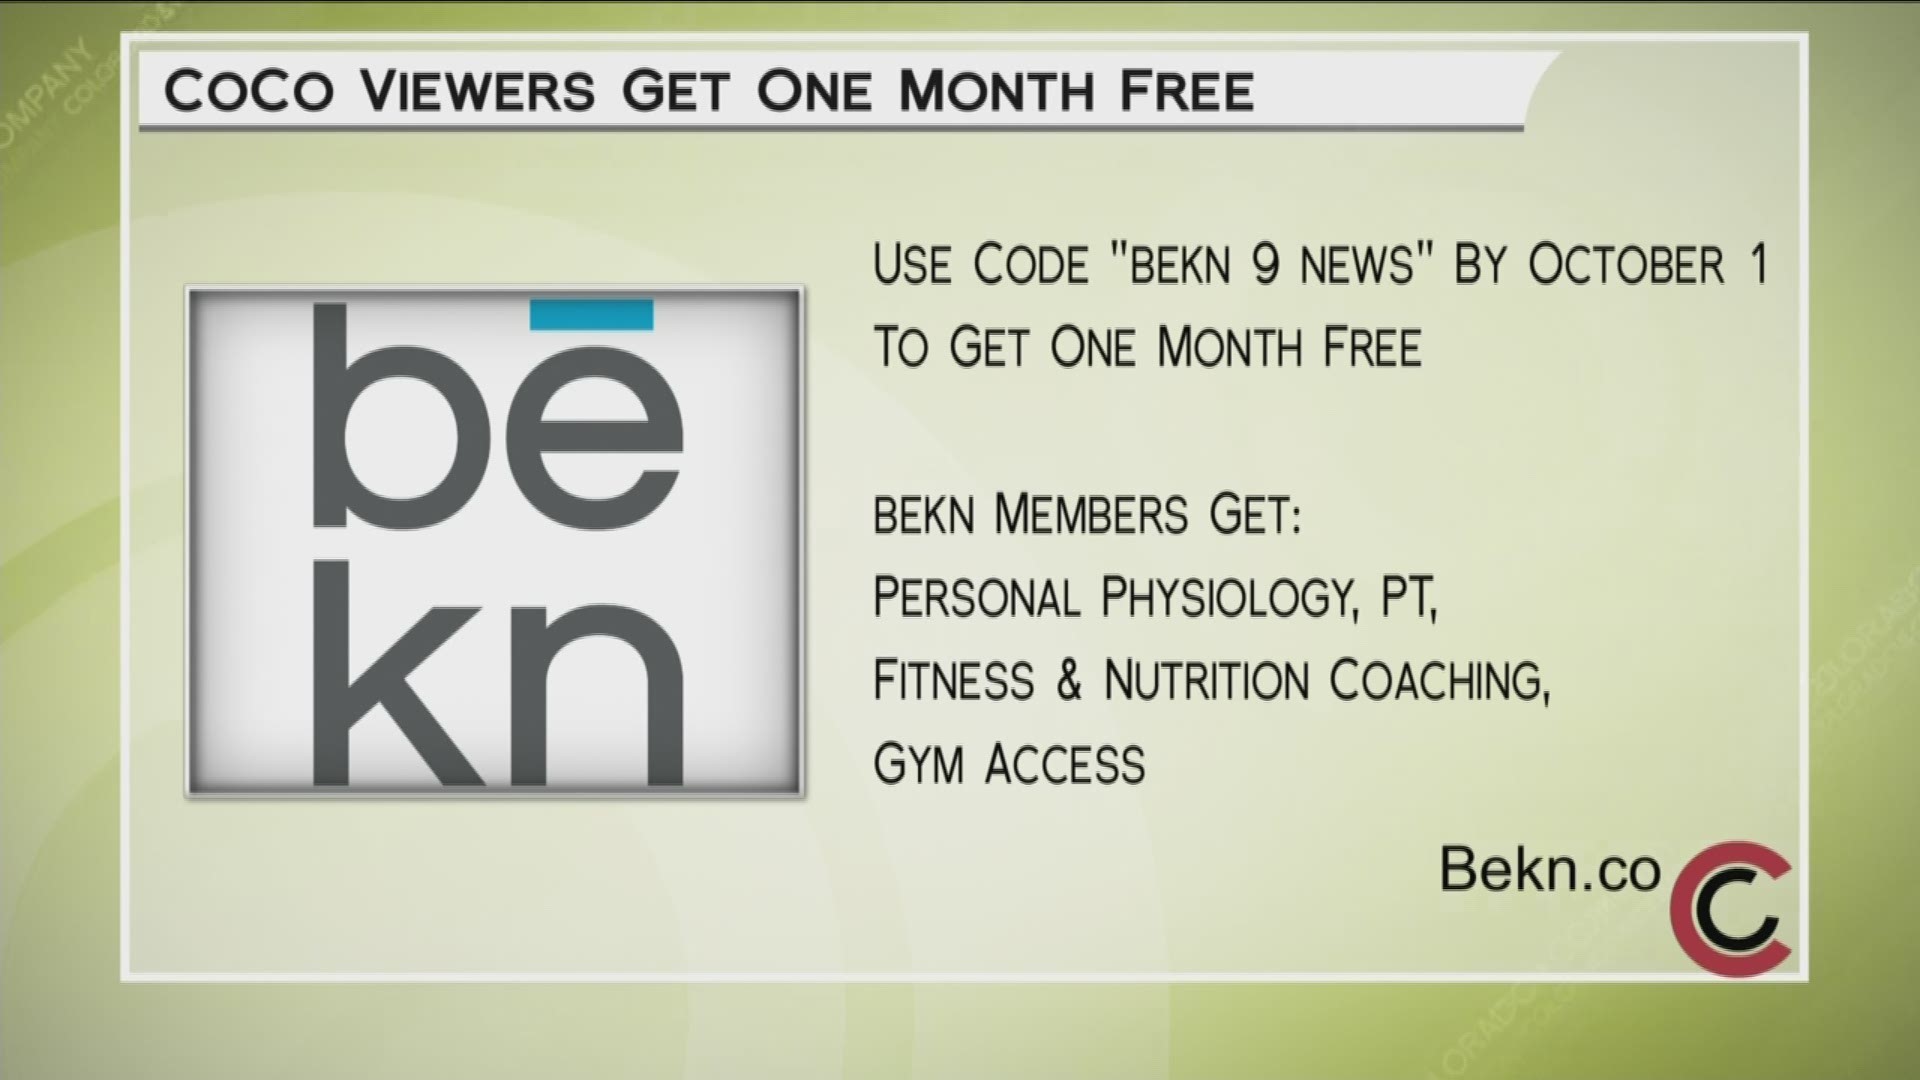 Bēkn combines physiology with movement and motivation. bēkn tailors a plan that fits your body, lifestyle, and goals. Memberships are just $49 a month for personalized physiology testing, unlimited PT, nutrition and fitness coaching, as well as gym access. COCO Viewers can take advantage of a free month when you become a member—just use code BEKN 9 NEWS. Learn more at www.BEKN.co     THIS INTERVIEW HAS COMMERCIAL CONTENT. PRODUCTS AND SERVICES FEATURED APPEAR AS PAID ADVERTISING.